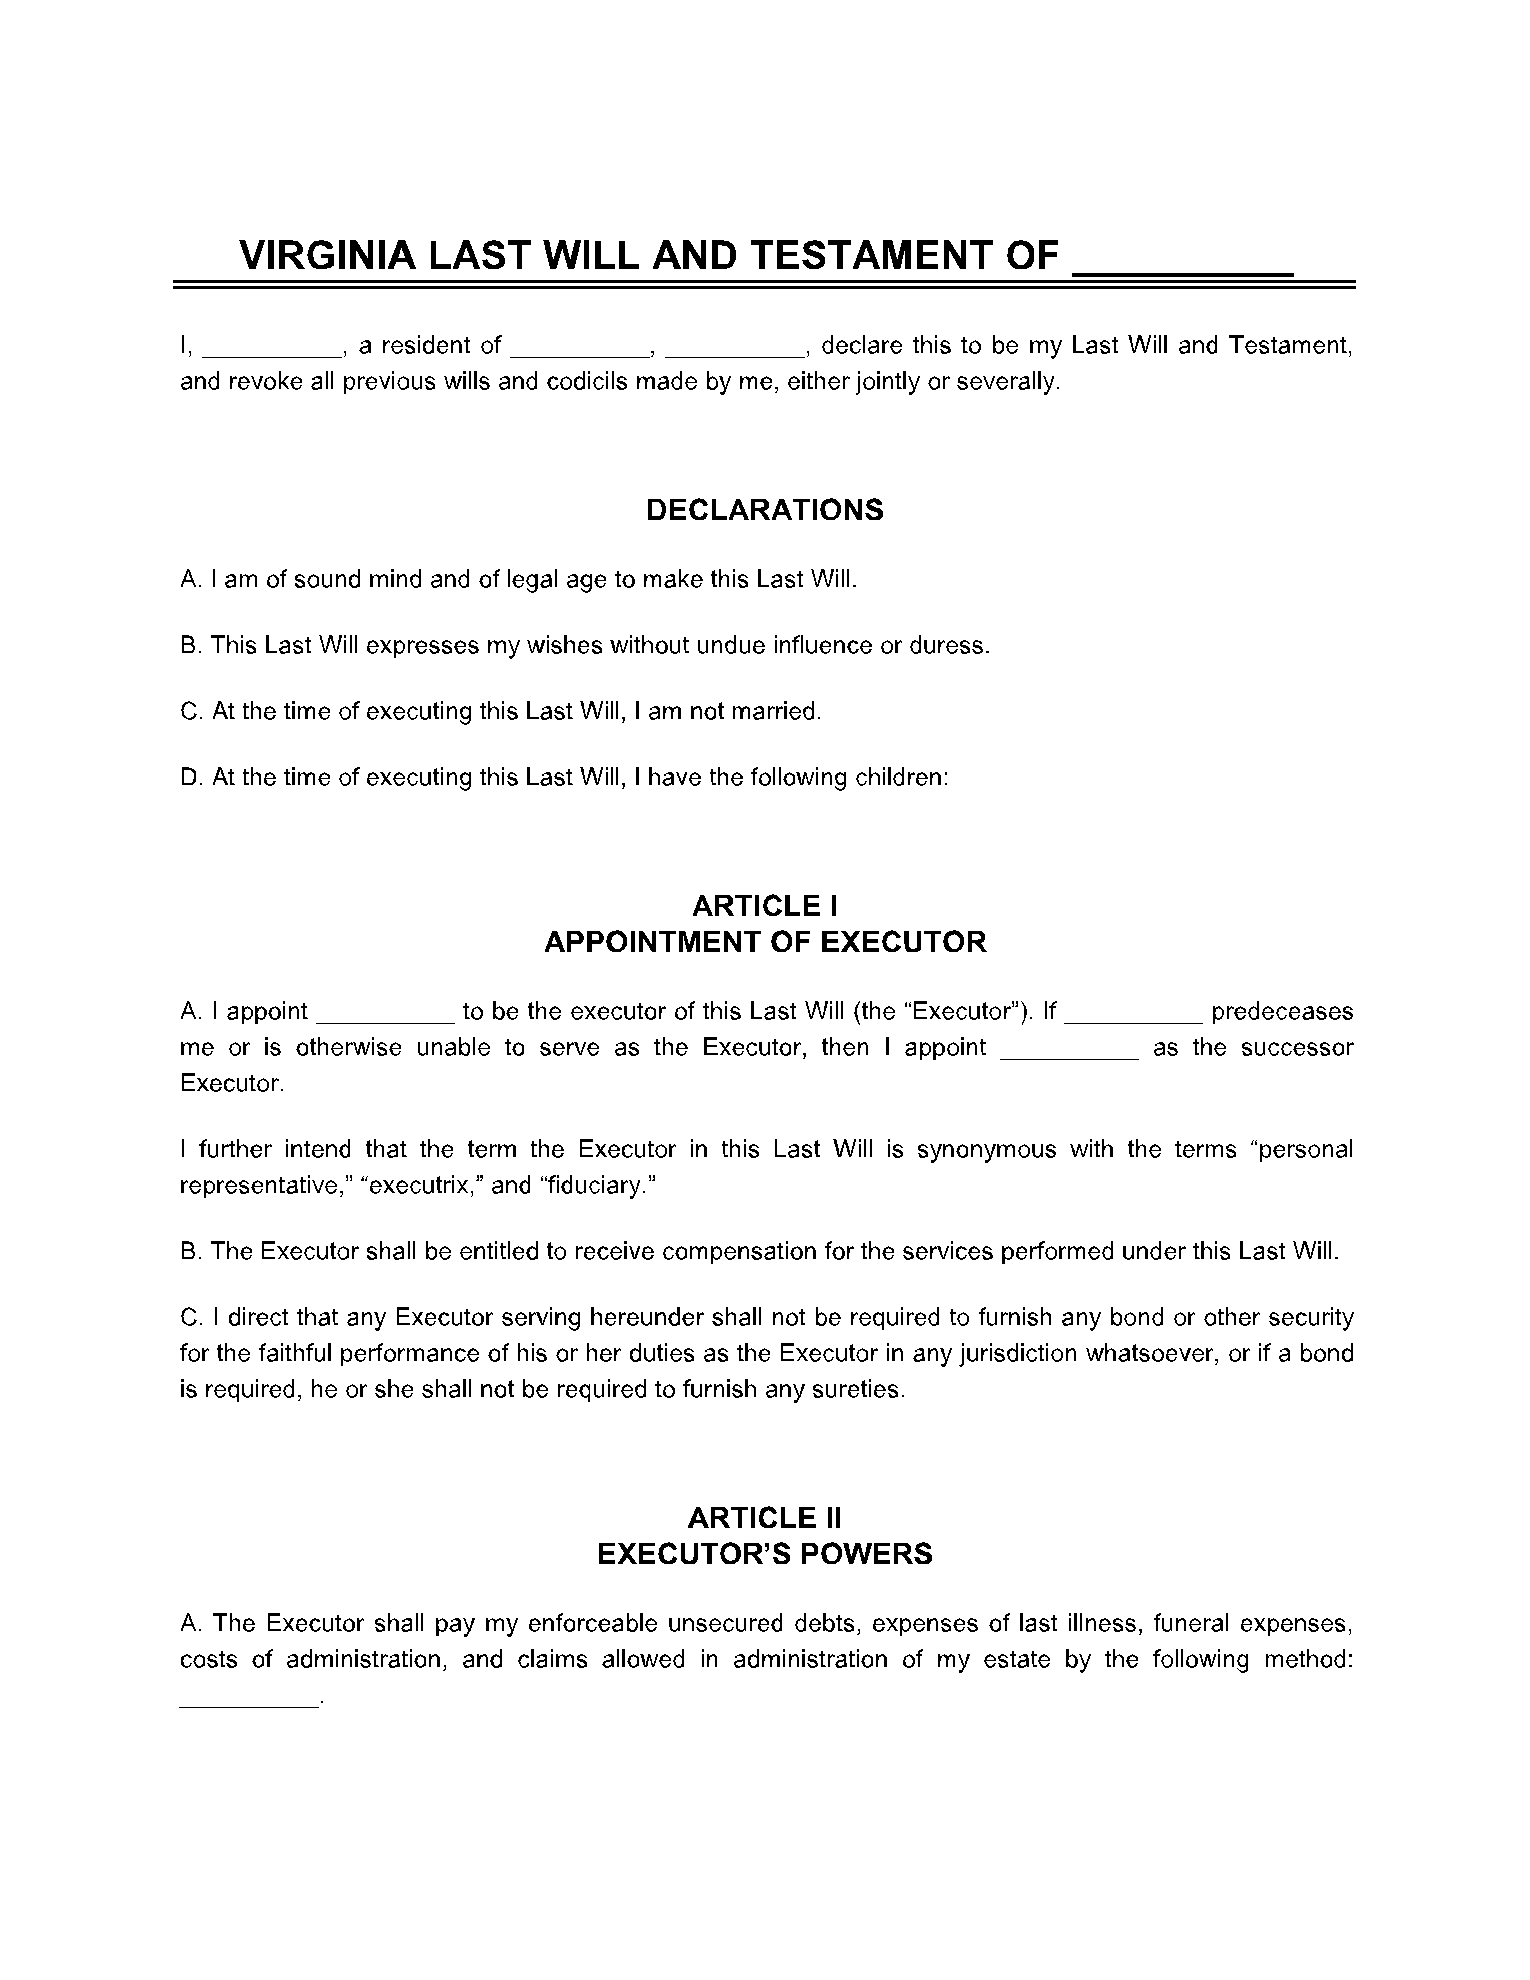 Last Will and Testament Template Virginia